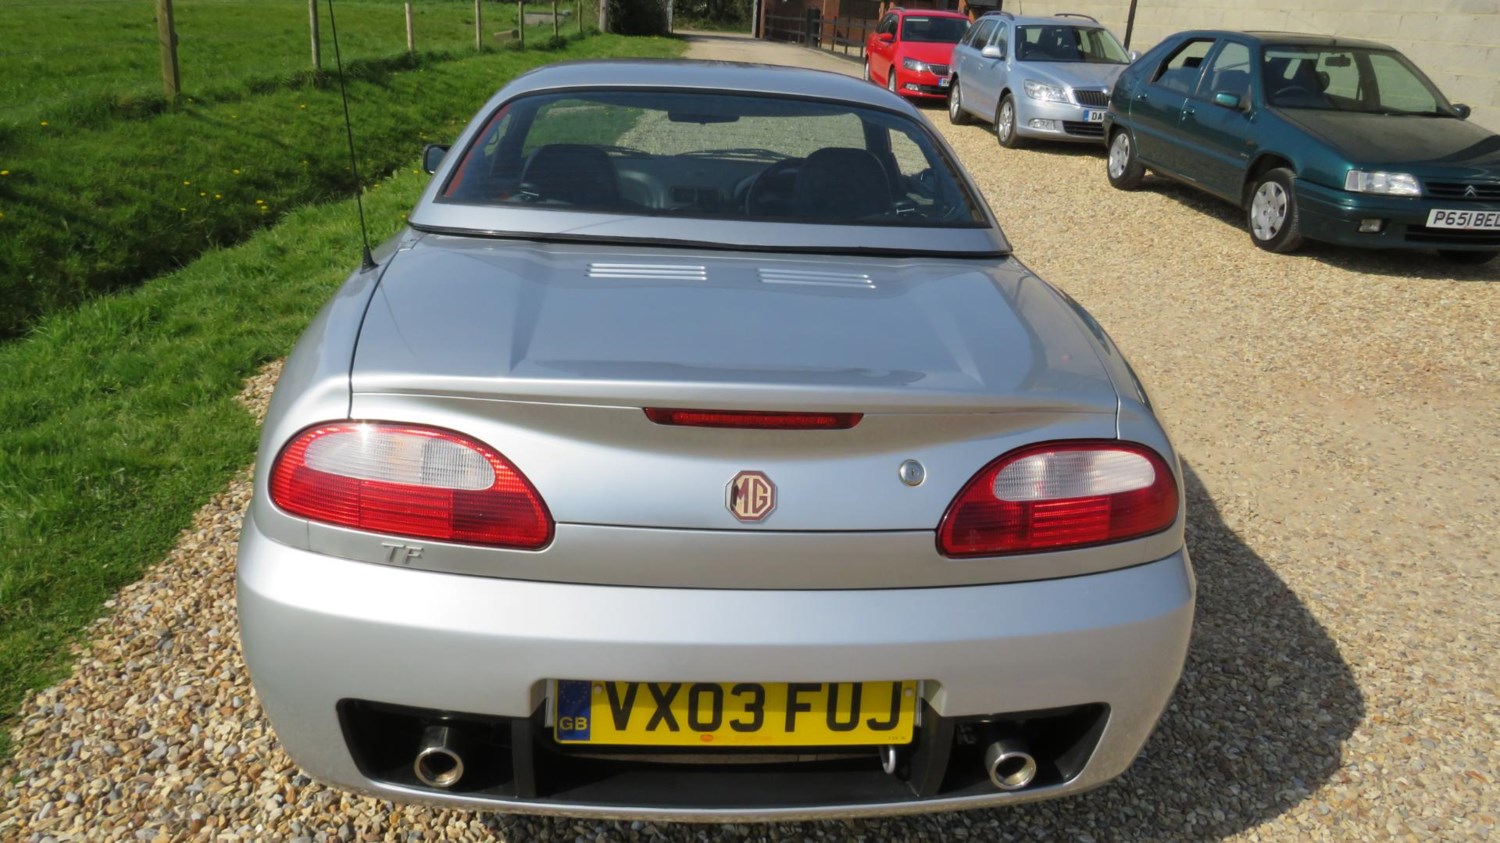 2003 (03) MG MGTF 1.8 135 16V 2 DOOR GENUINE LOW MILEAGE For Sale In Lymington, Hampshire